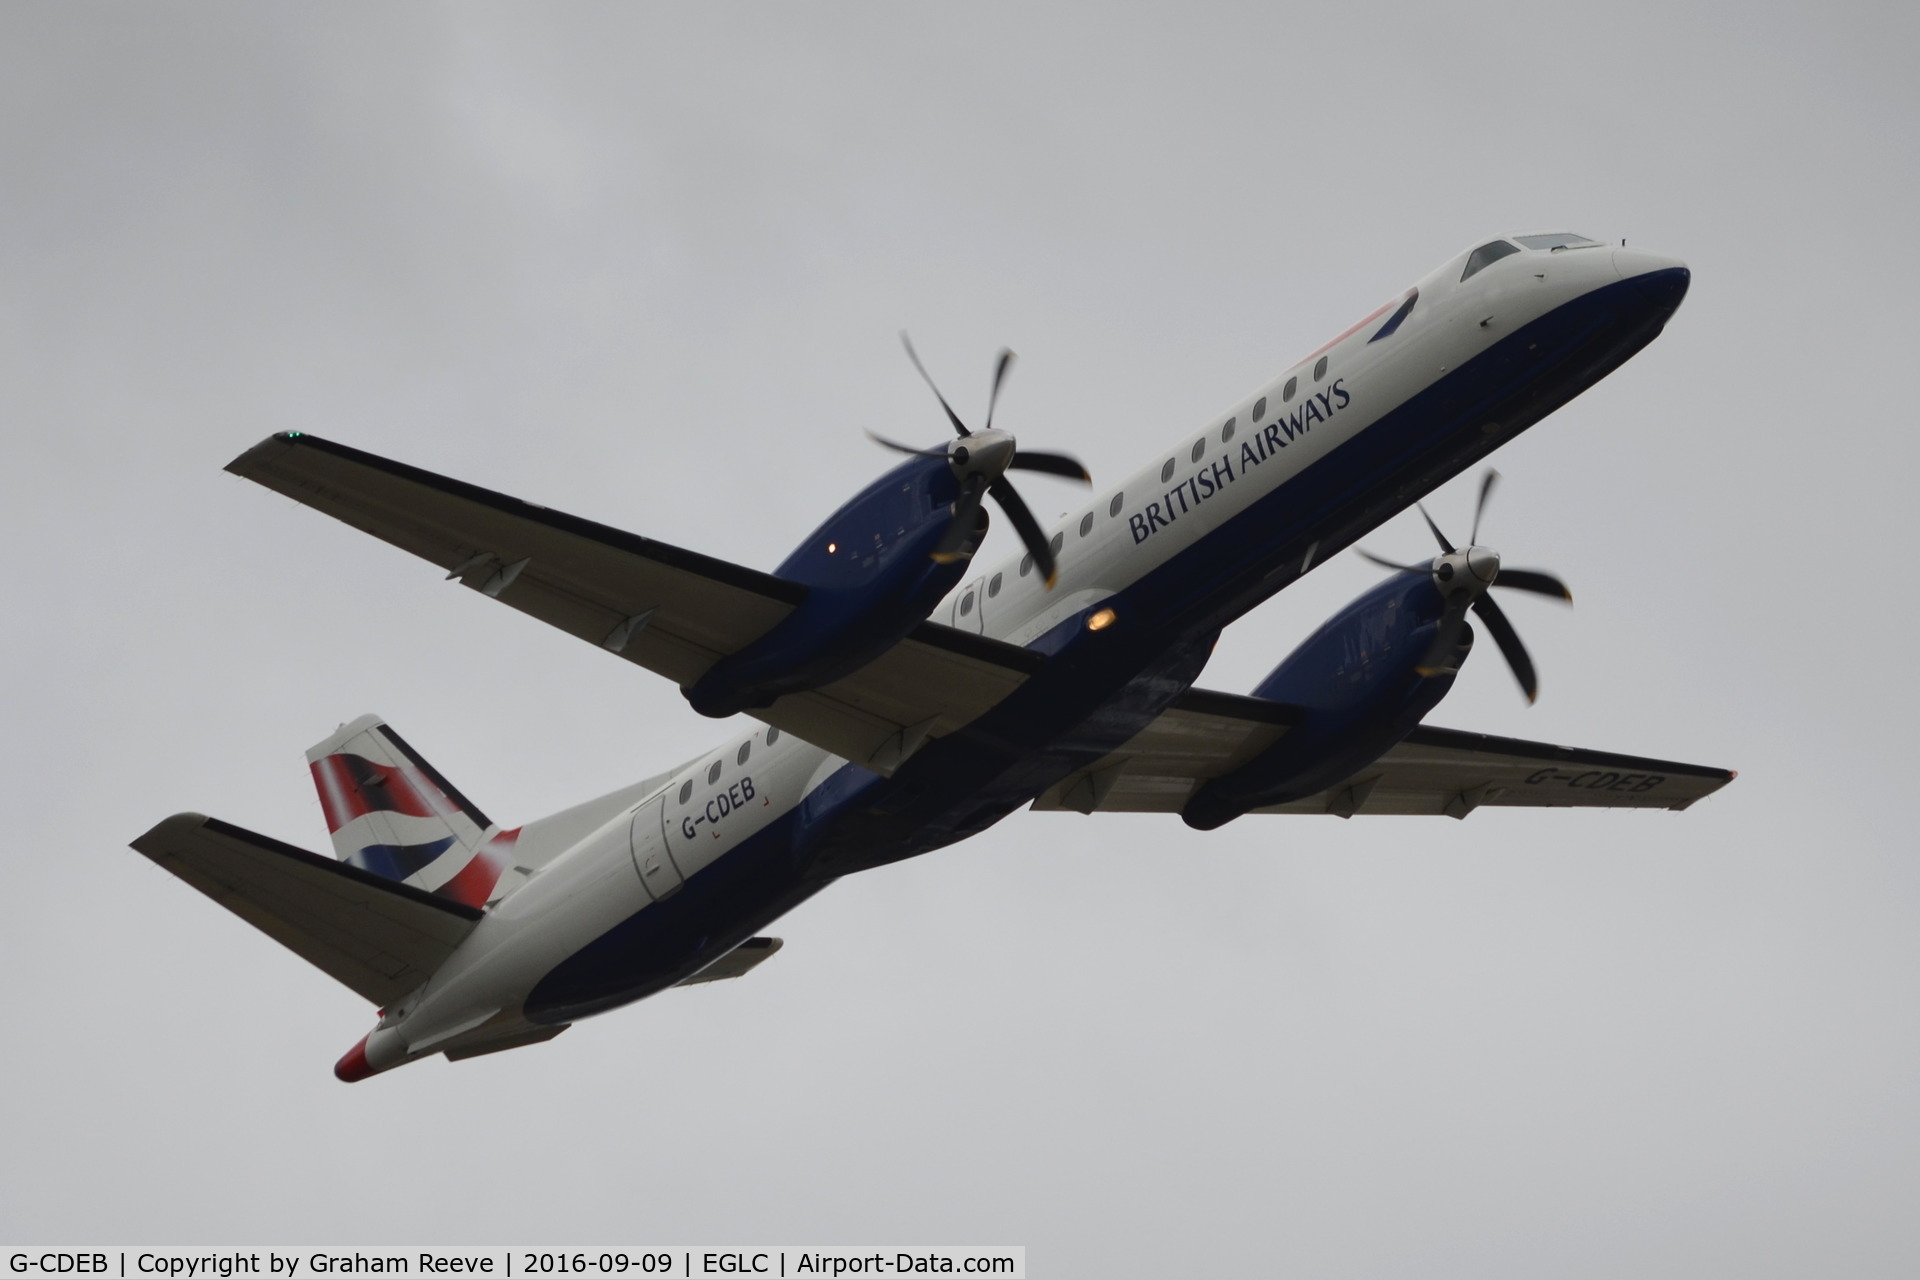 G-CDEB, 1996 Saab 2000 C/N 2000-036, Departing from London City.